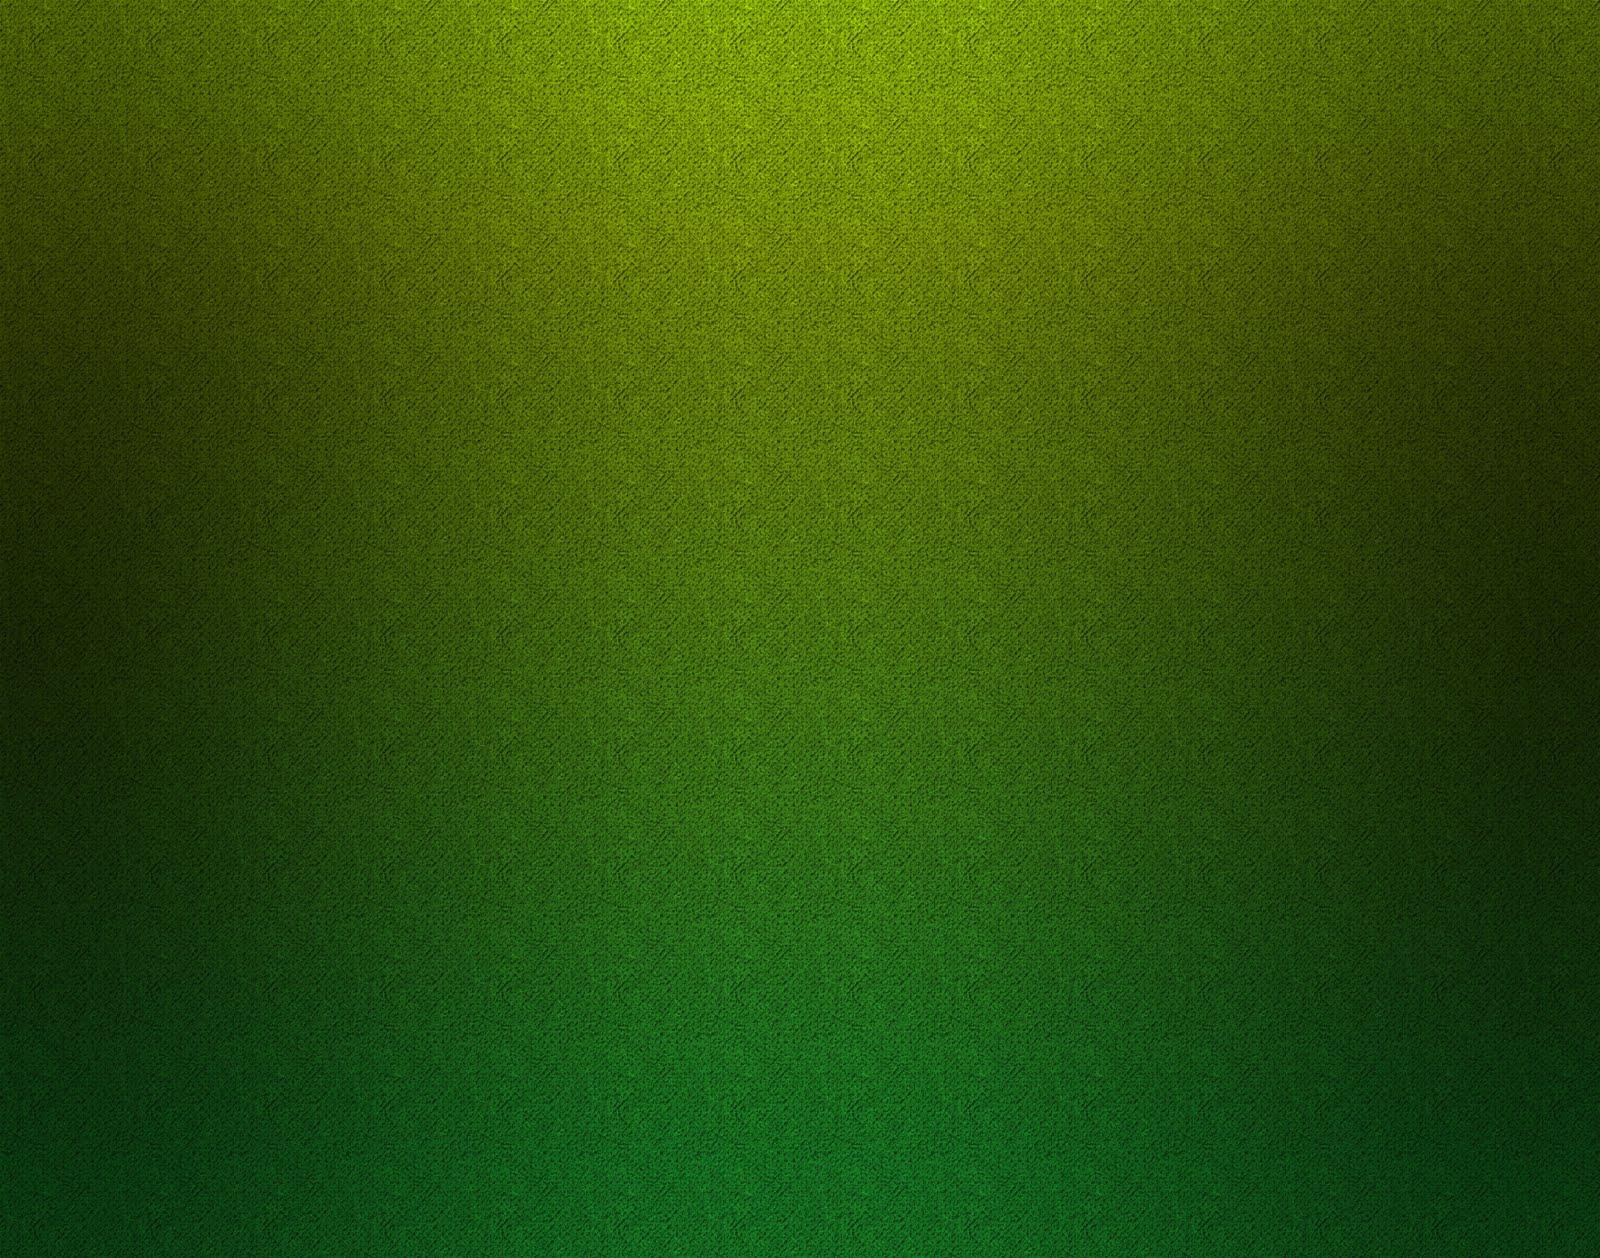 Free Green Textures Background For PowerPoint